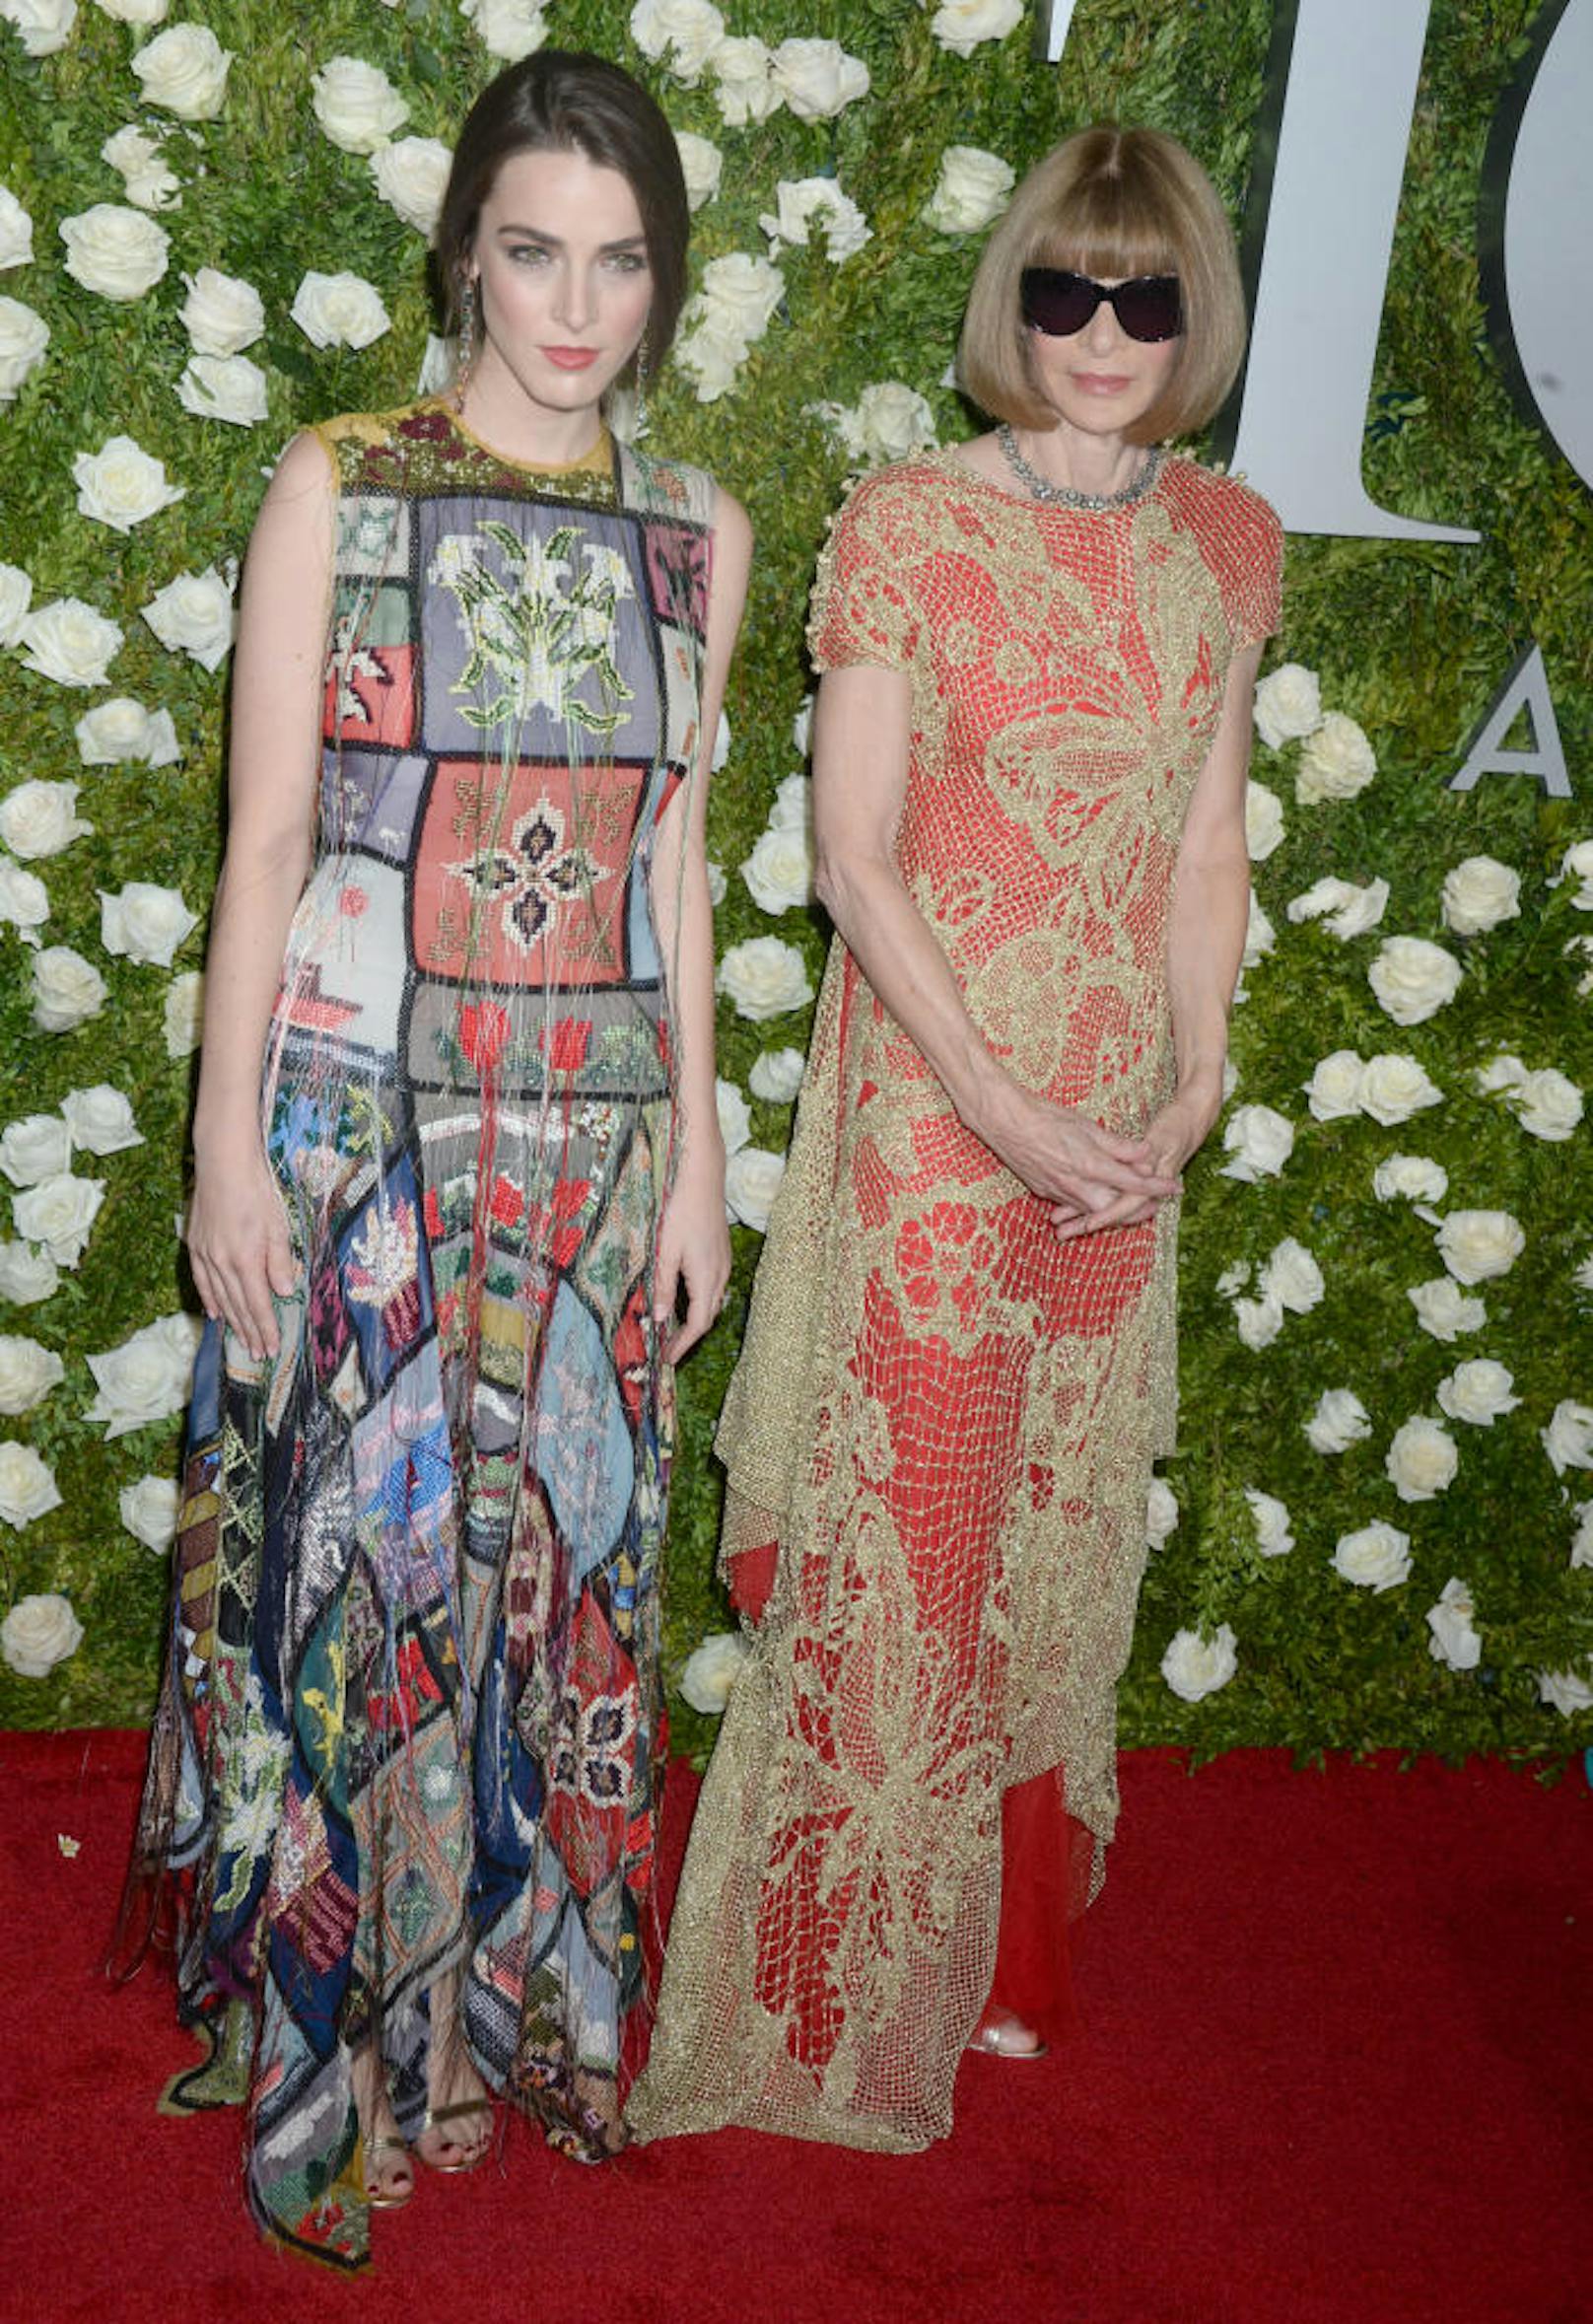 Bee Shaffer, Anna Wintour attending the 71st Annual Tony Awards at Radio City Music Hall on June 11, 2017 in New York City, NY, USA. Photo by Dennis Van Tine/ABACAPRESS.COM